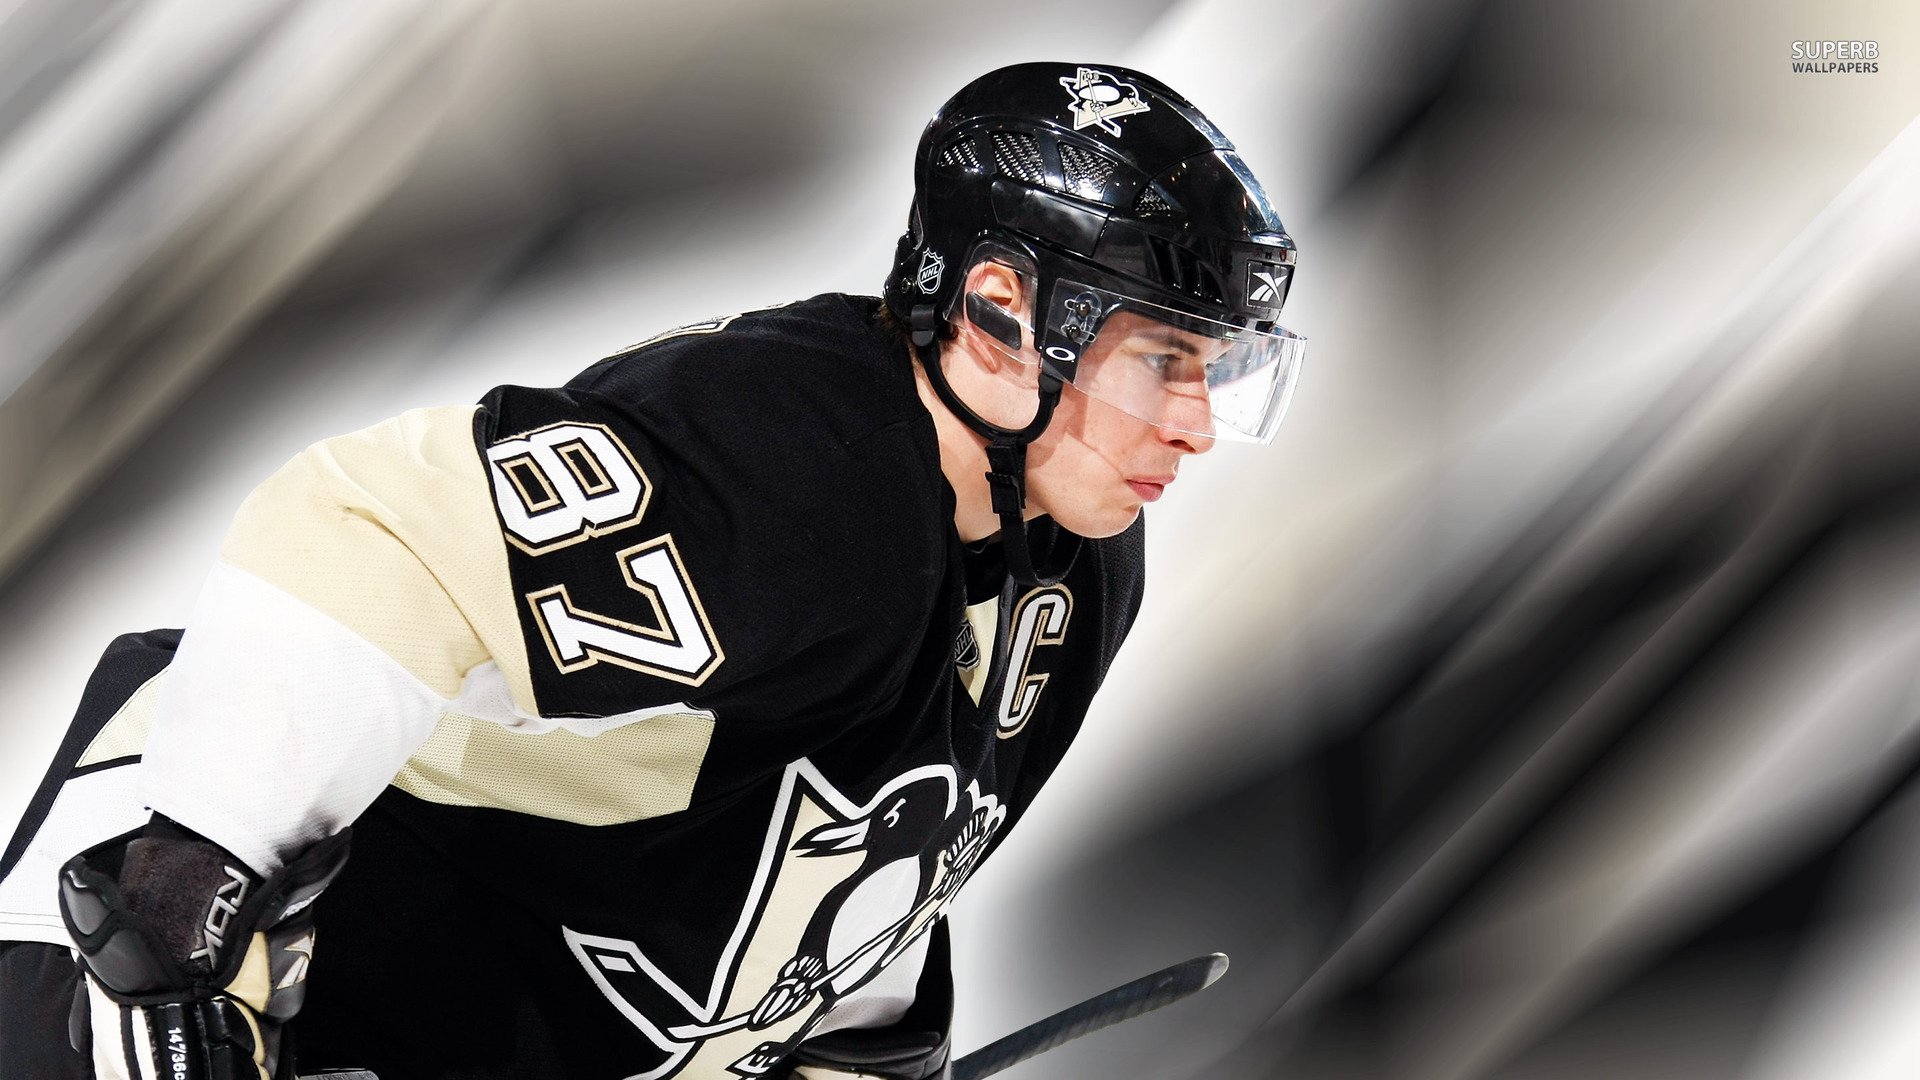  Sidney Crosby wallpapers and images   wallpapers pictures photos